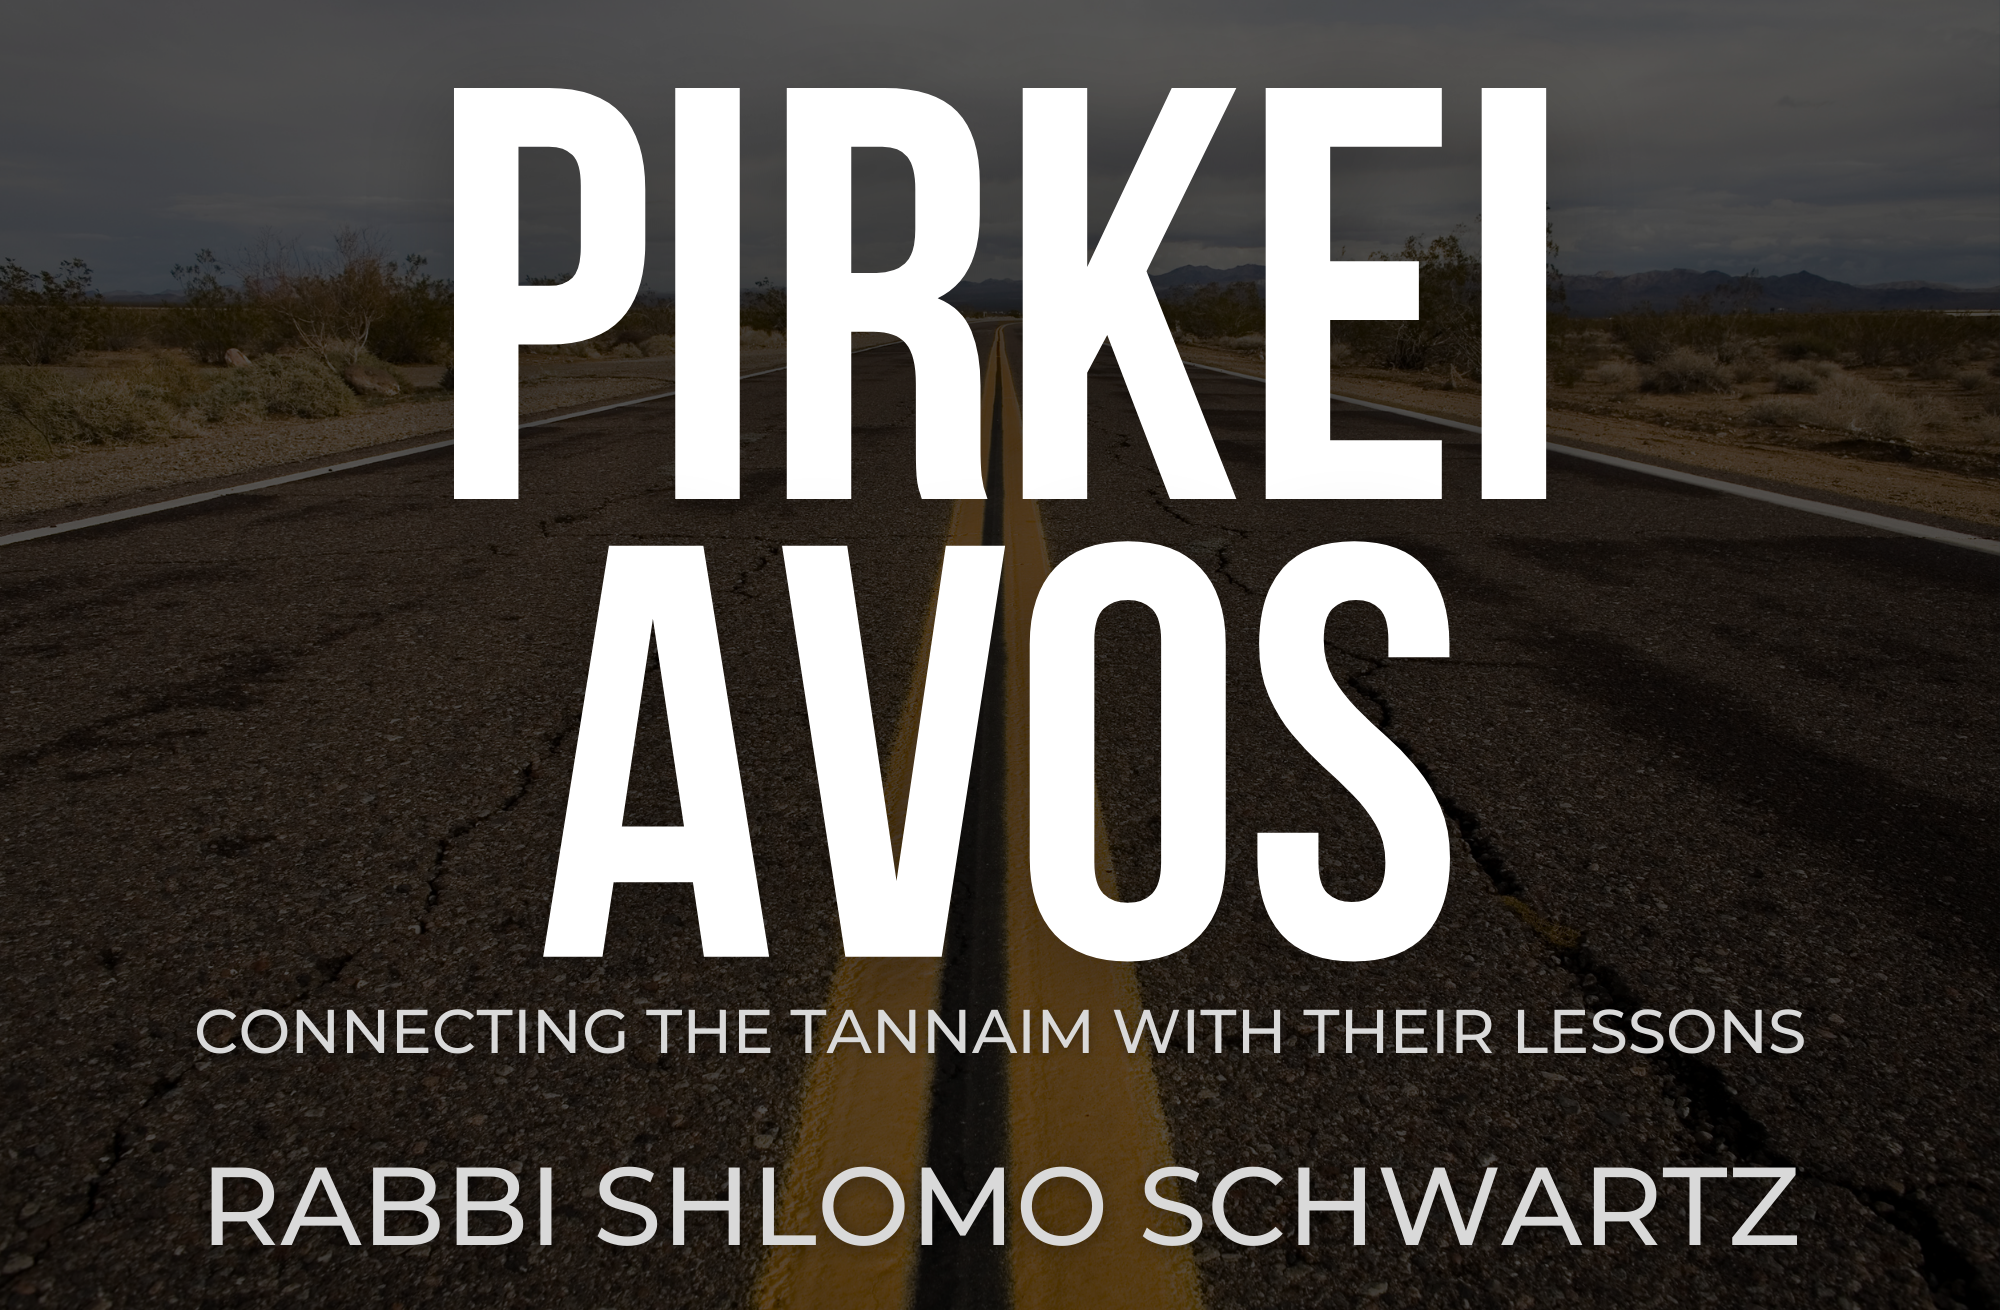 Pirkei Avos: Connecting the Tannaim With Their Lessons